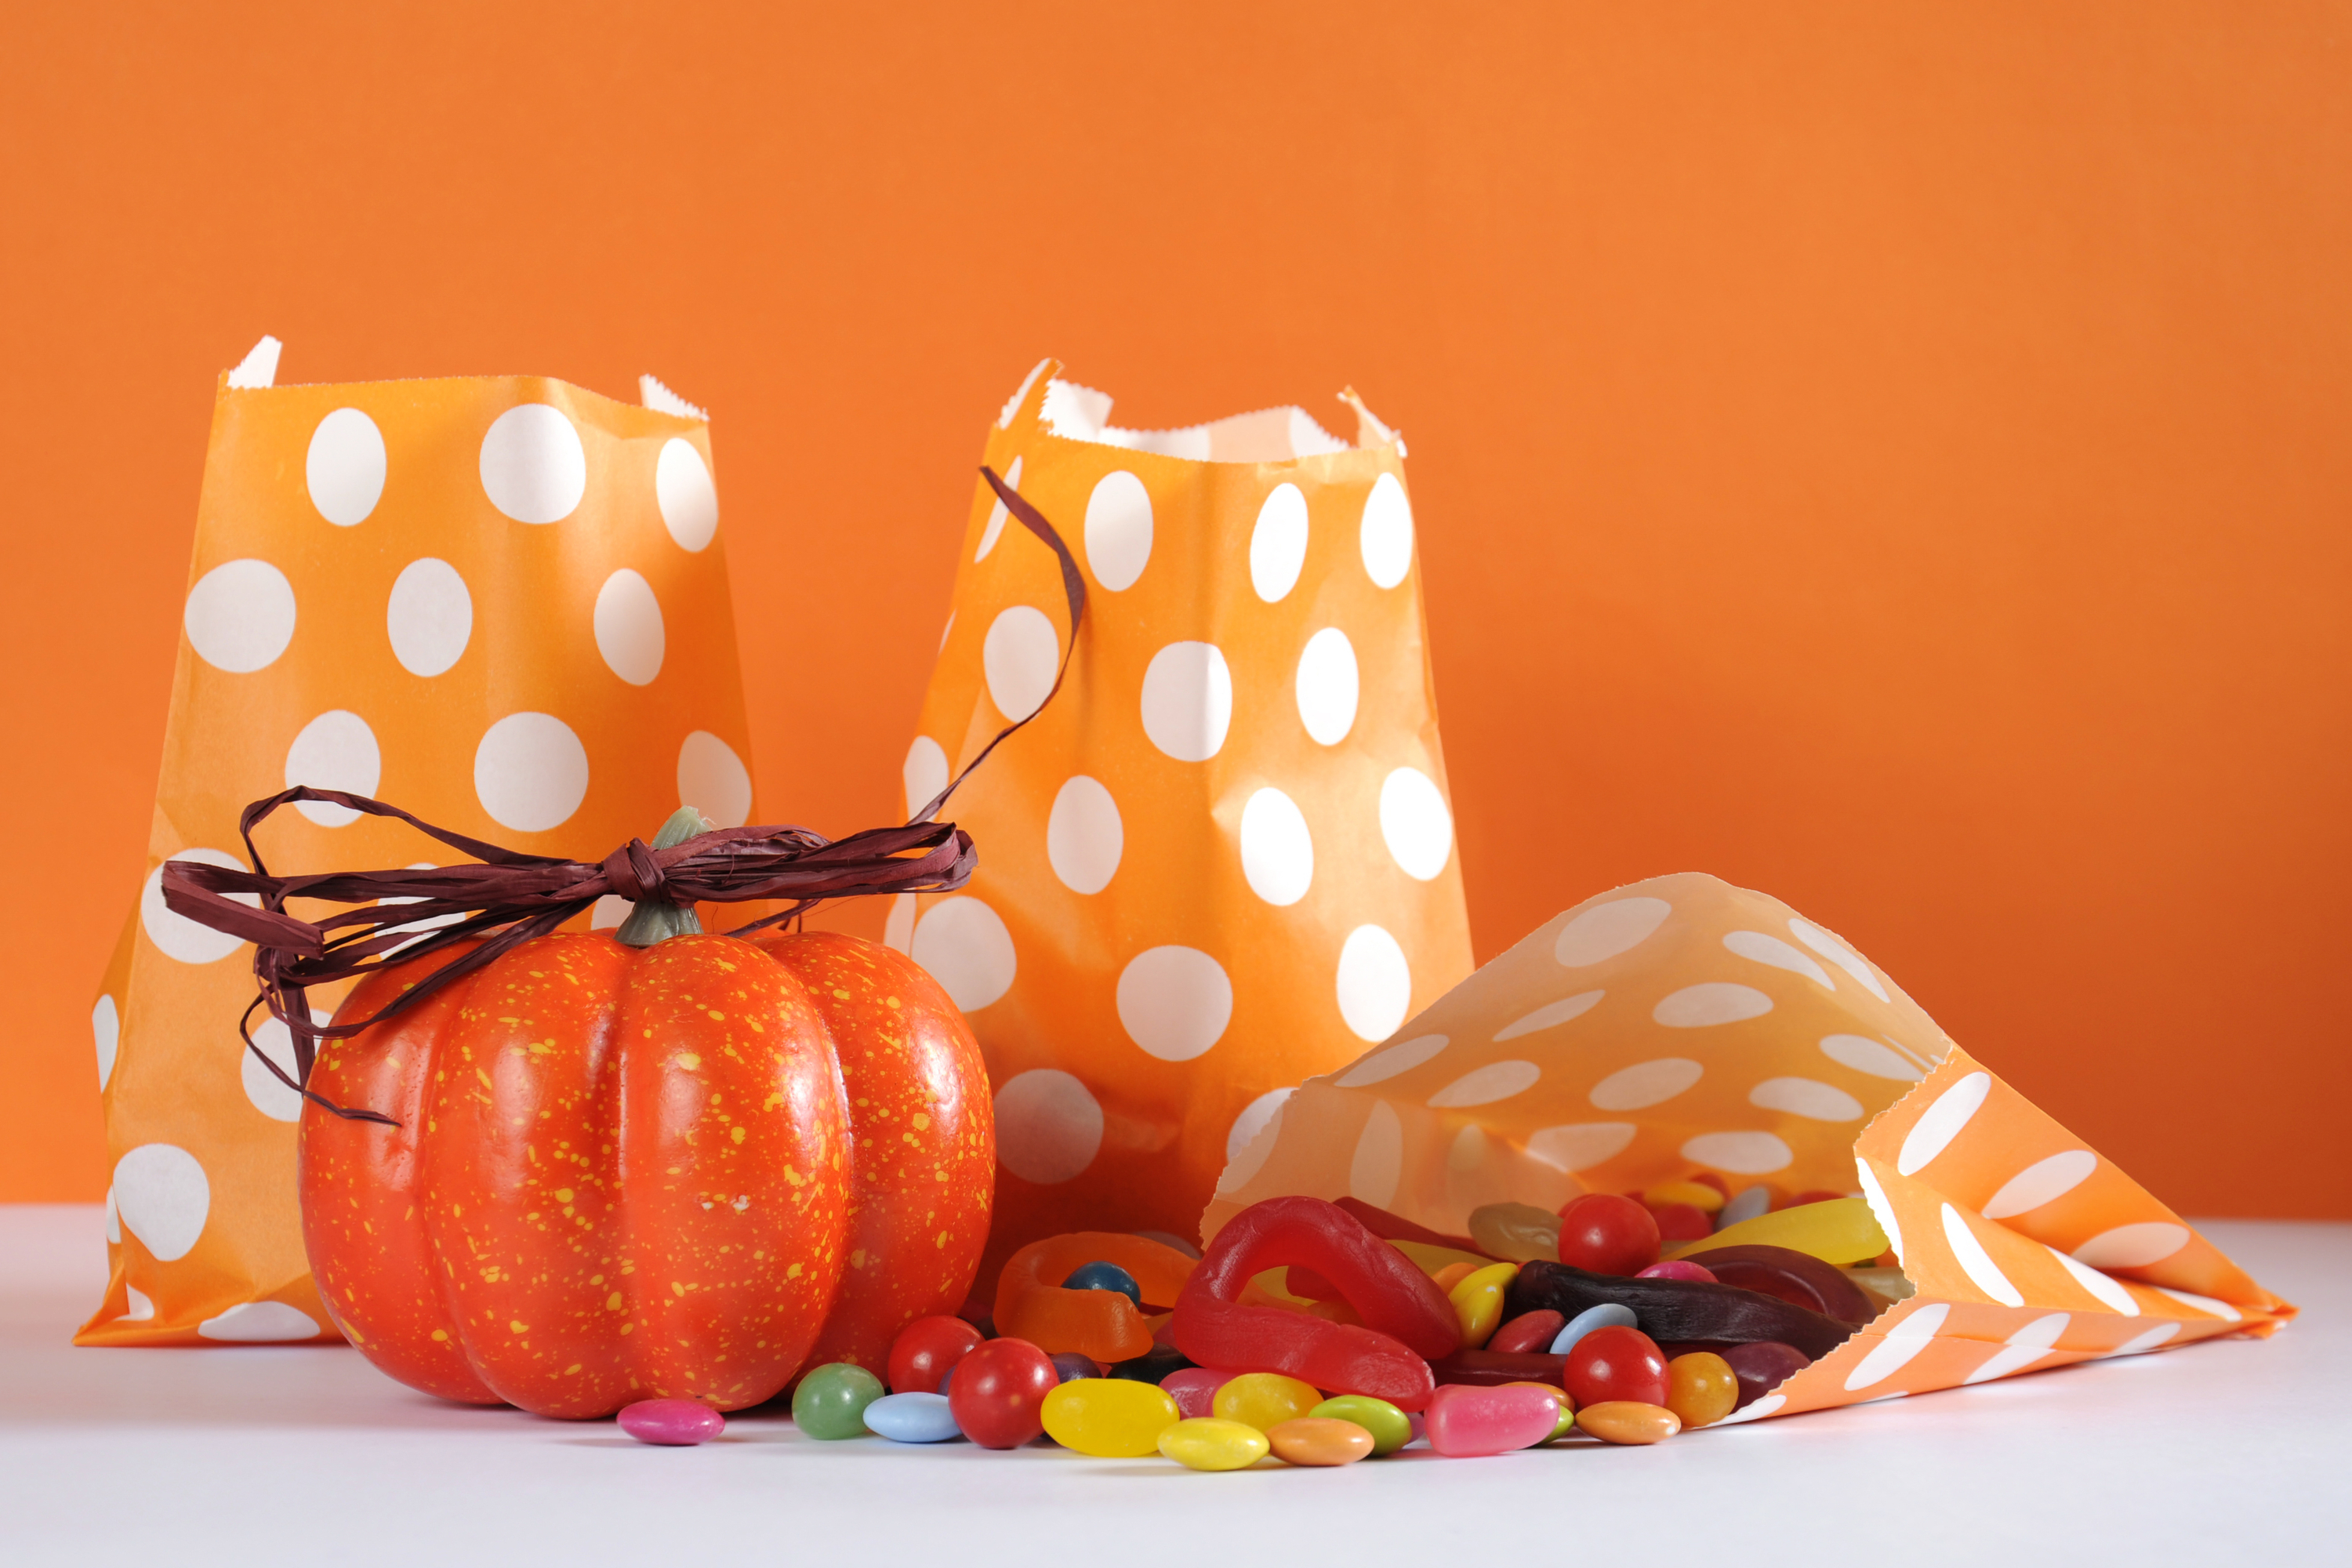 Have you ever given out Thanksgiving treat bags? They are a great way to make people extra grateful! Here are some ideas for Thanksgiving treat bags. 